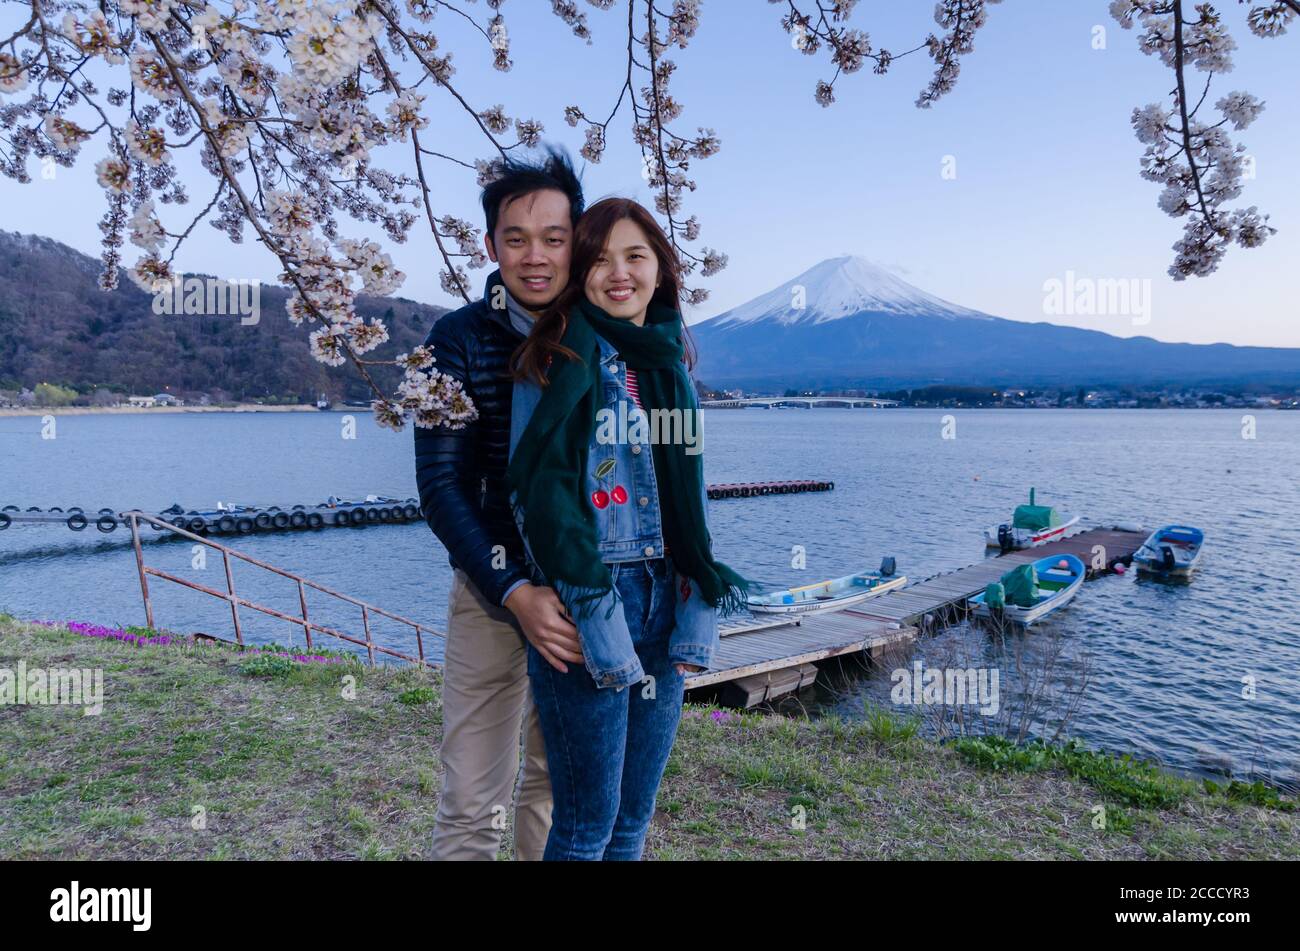 Lovely couple taking photo at Kawaguchiko with Fuji mountain and cherry blossoms view in spring, Japan. Stock Photo